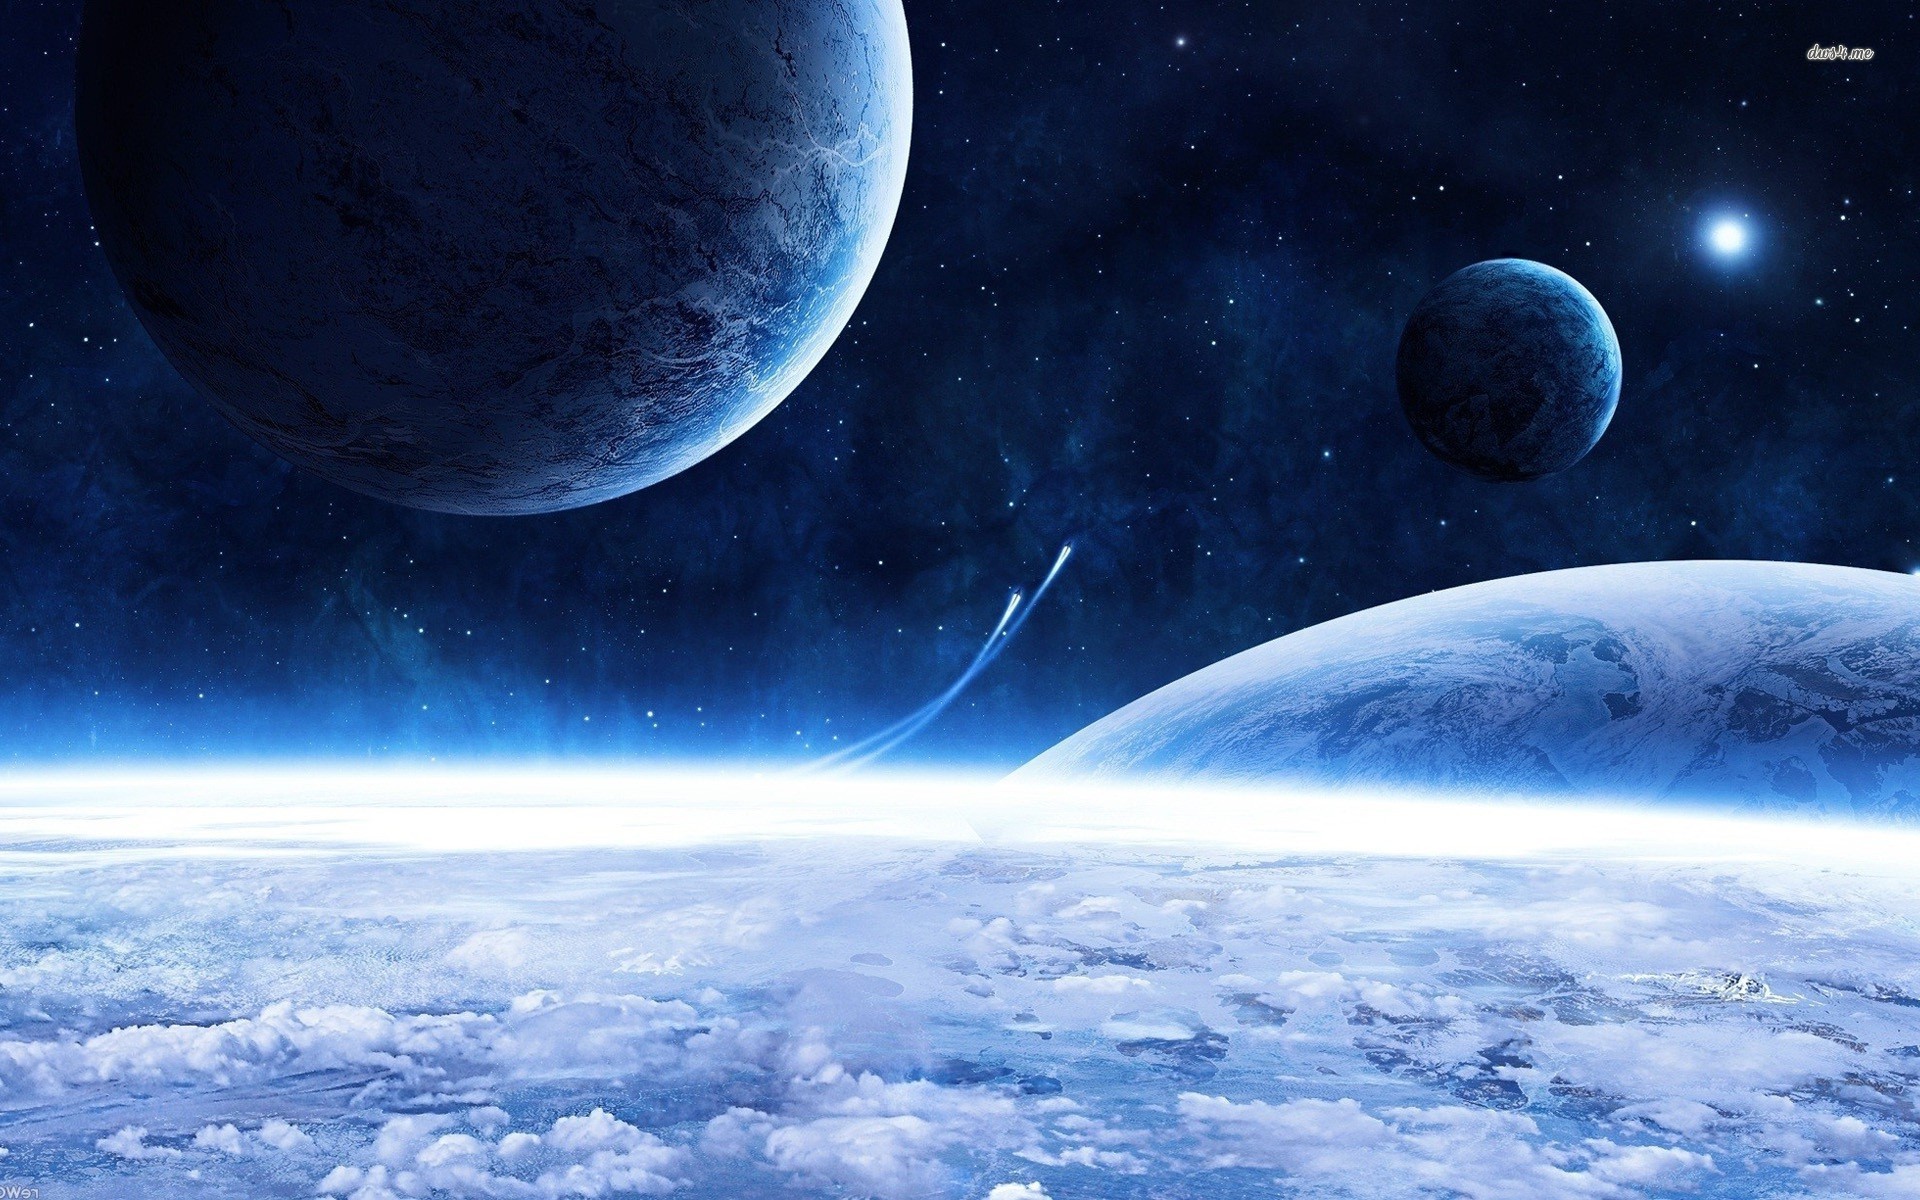 Blue Space wallpaper ·① Download free amazing wallpapers for desktop and mobile devices in any ...